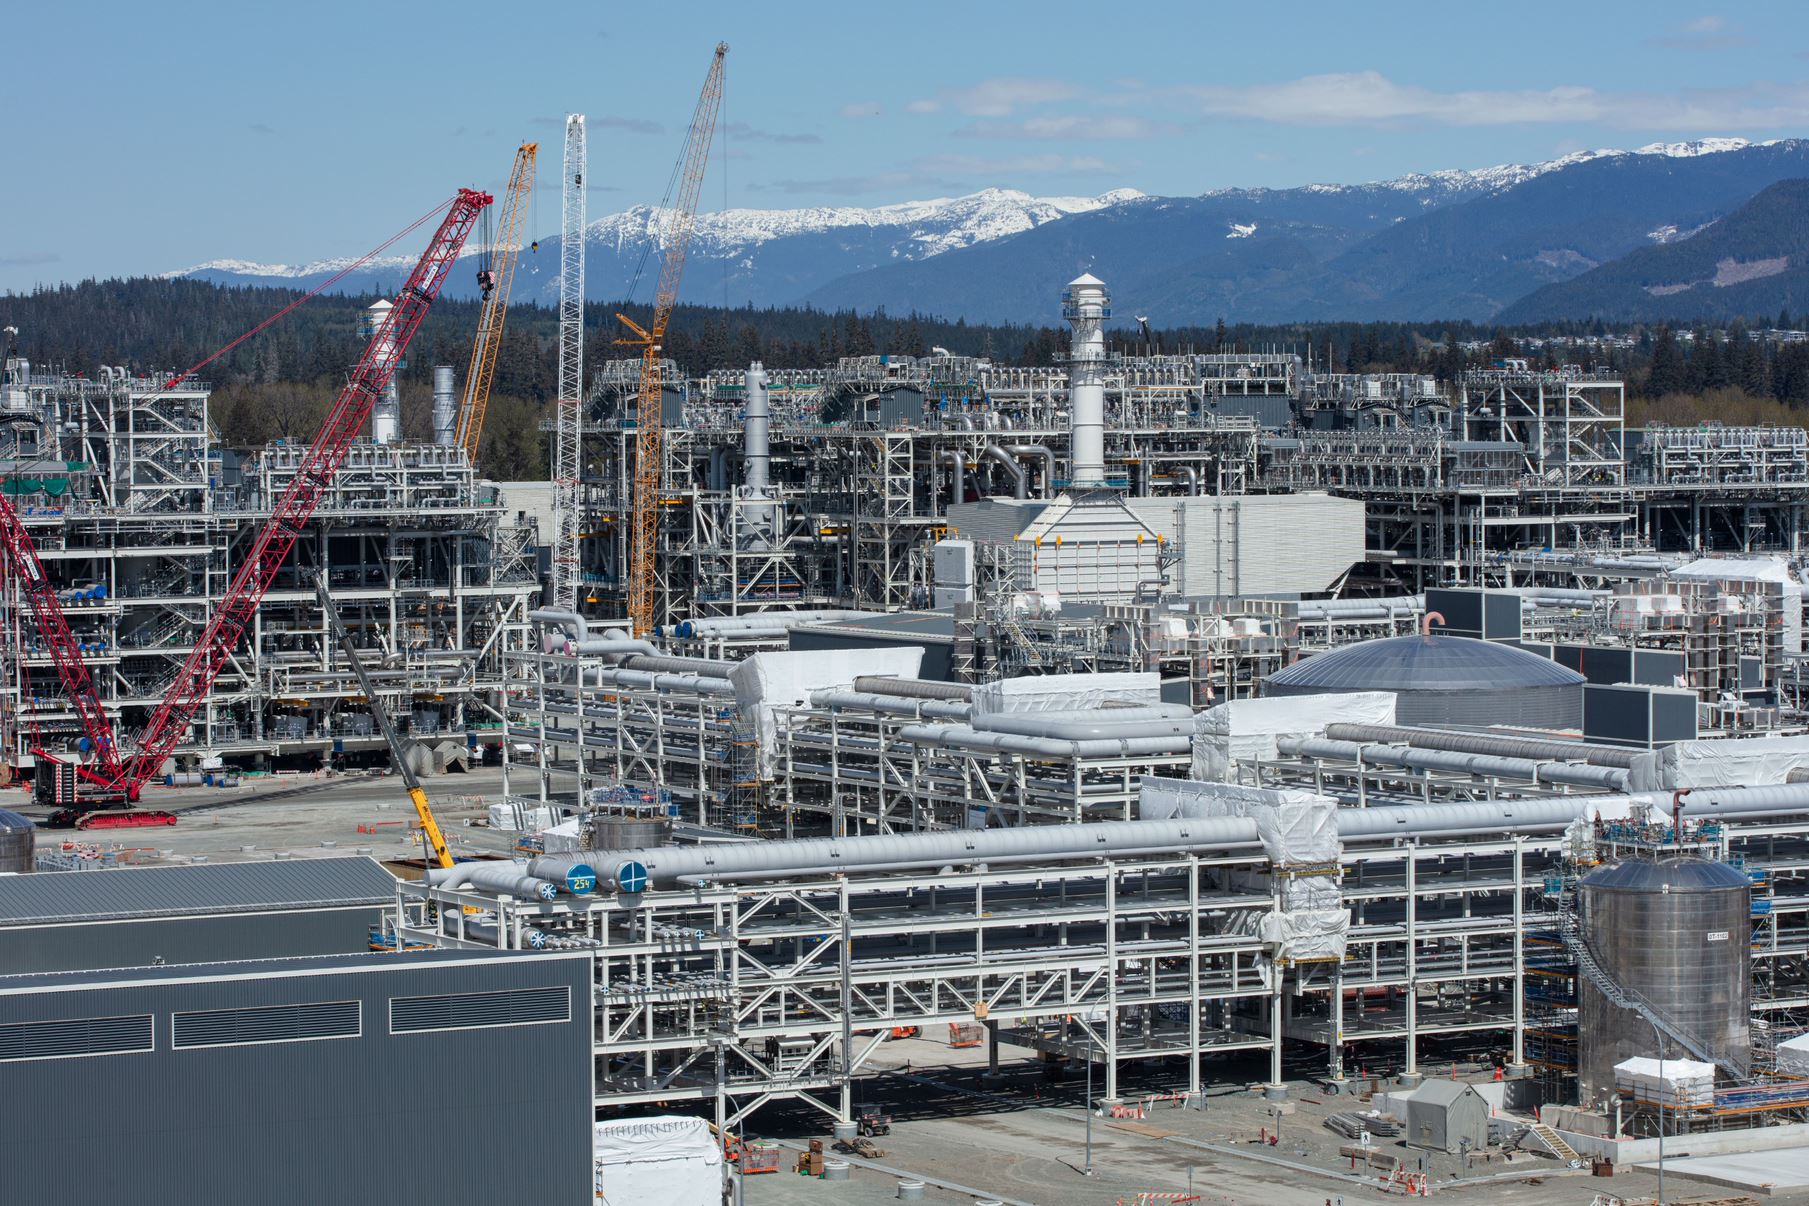 Liquefied natural gas pipelines and equipment at the LNG Canada site, showcasing infrastructure and operations